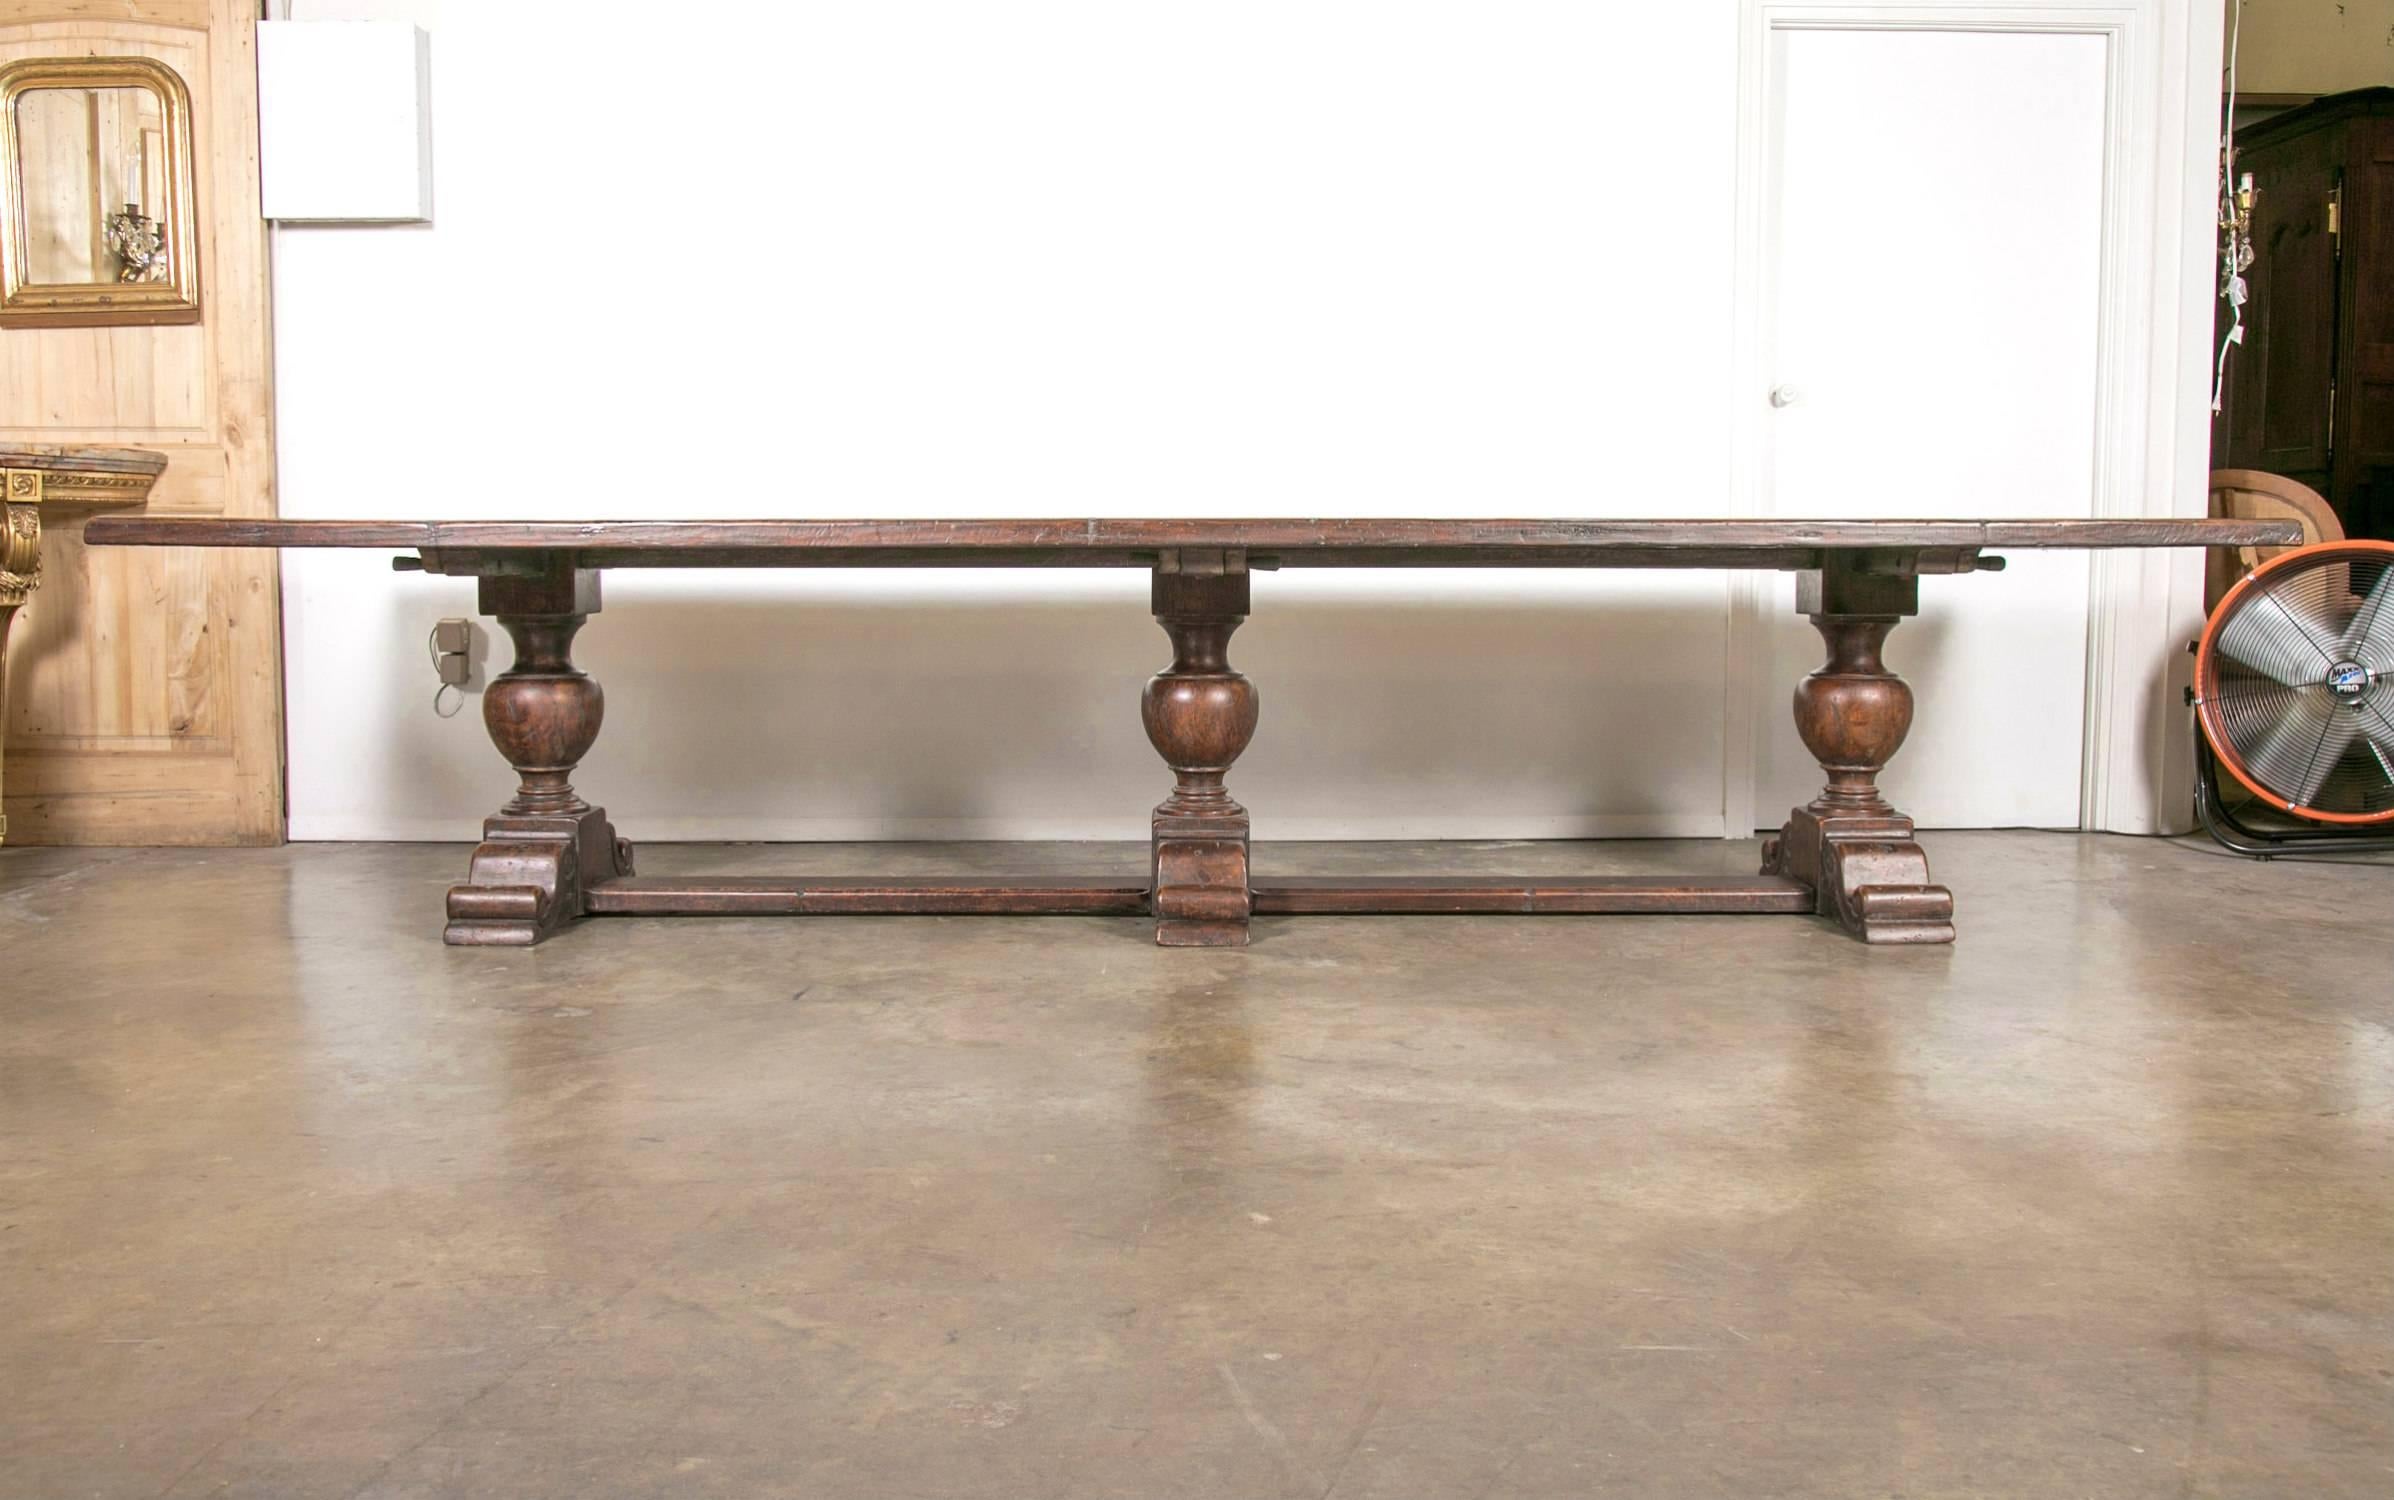 An exceptional early 19th century 13-foot French chateau trestle table, having a 2